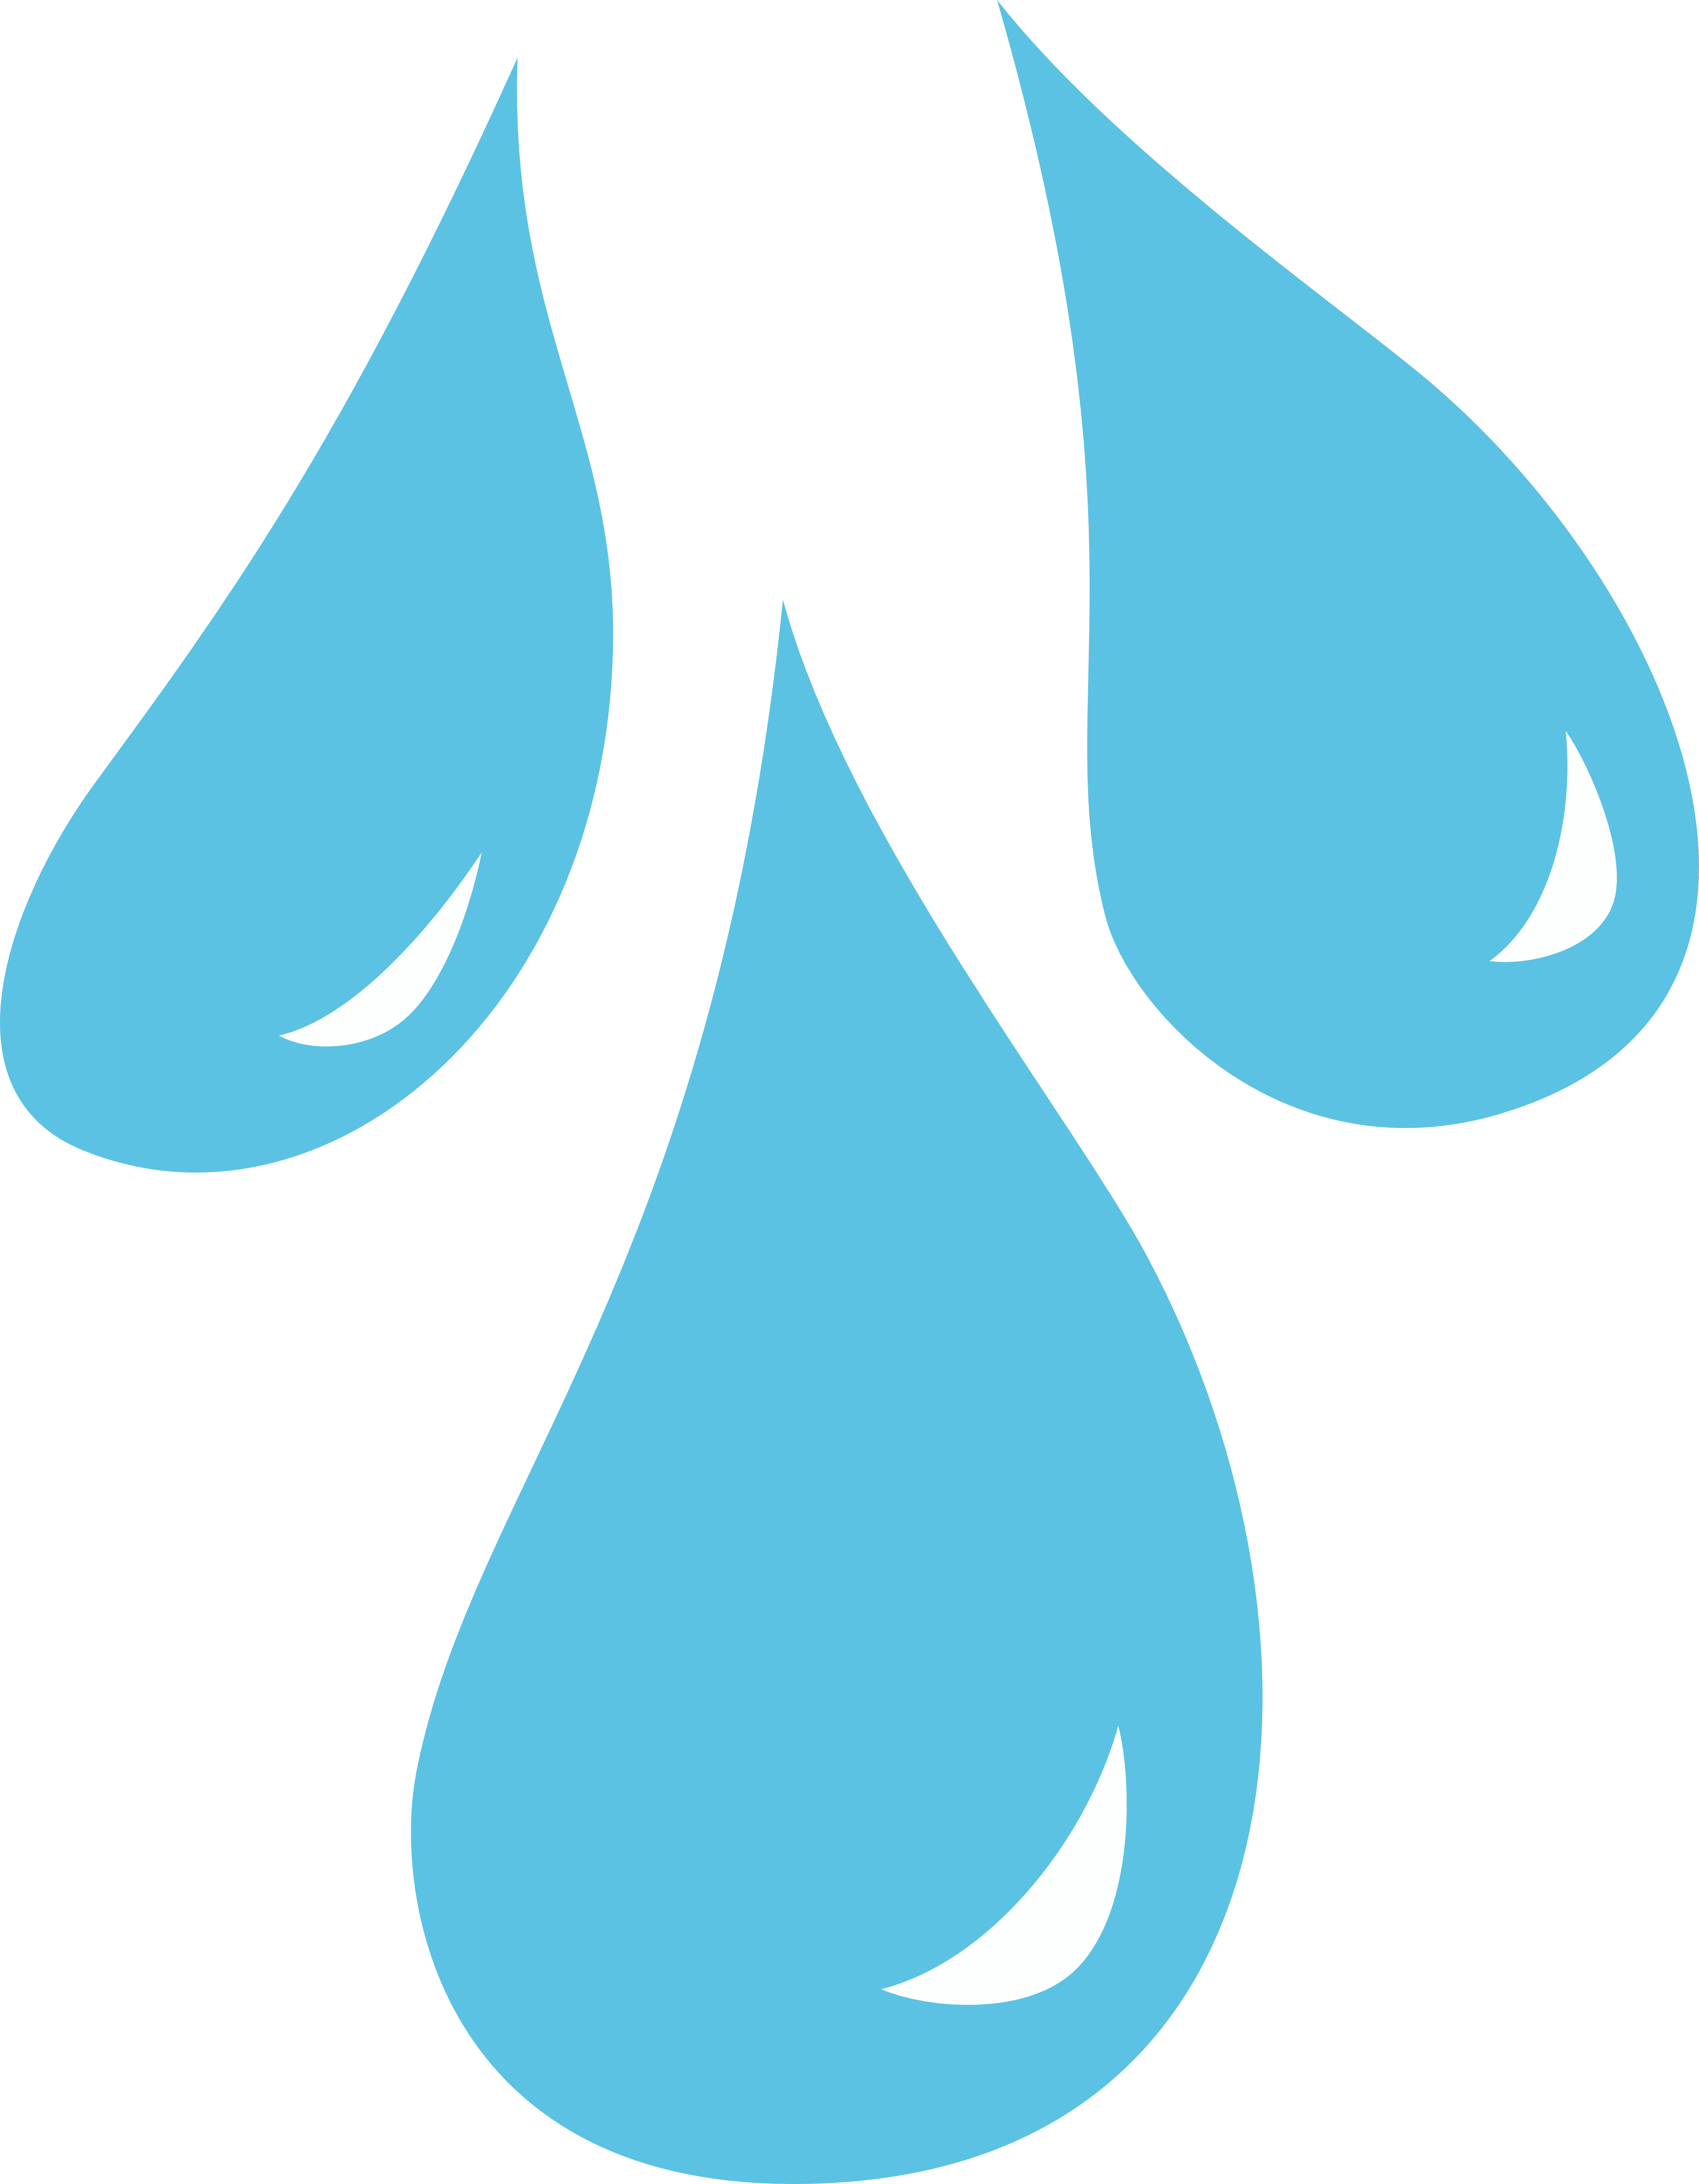 Water Drop Clipart Black And White - ClipArt Best